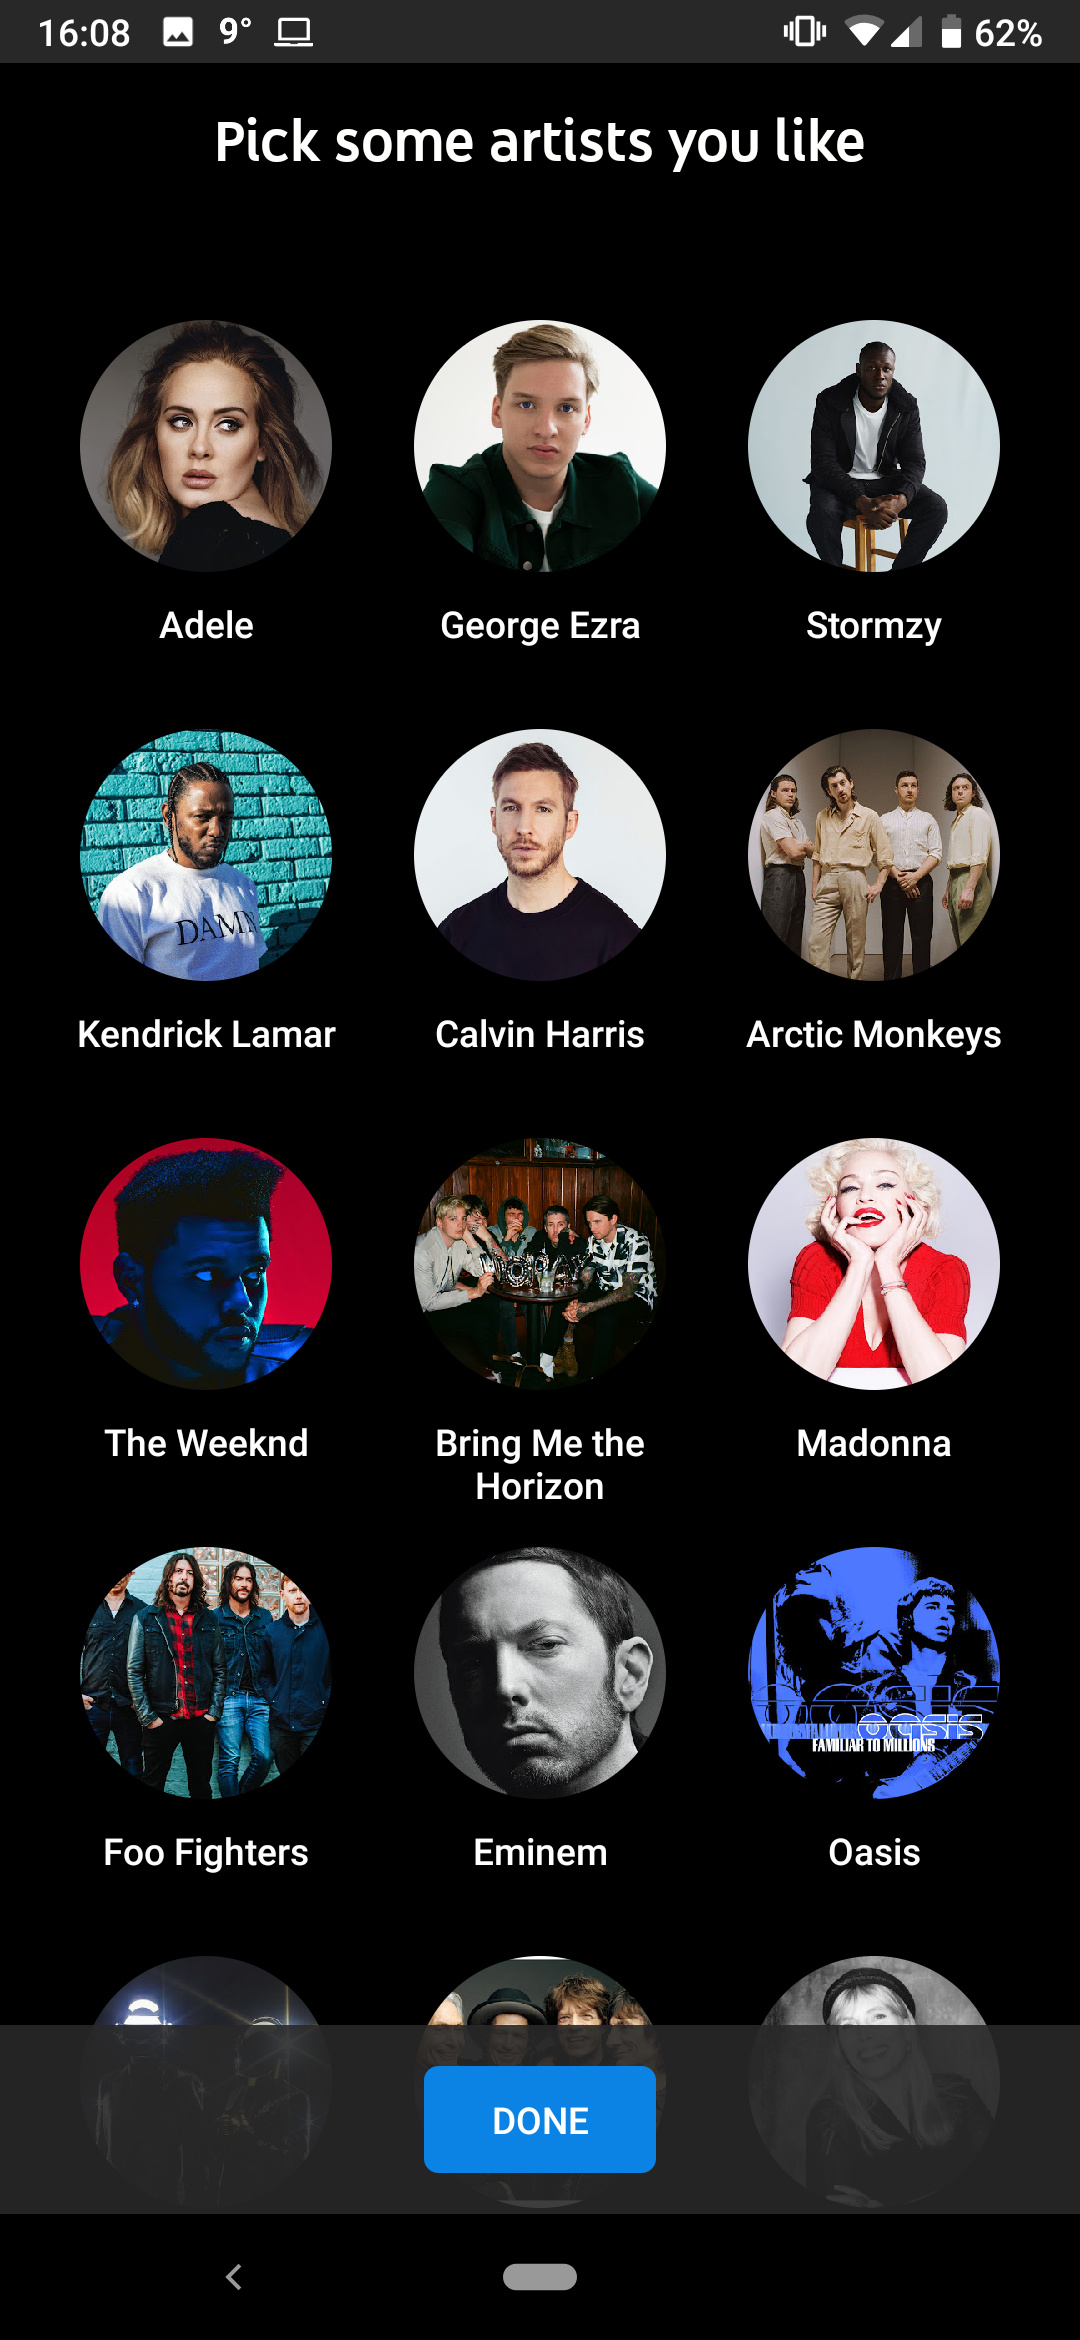 Music Picks Up Its Best Free Feature in a While